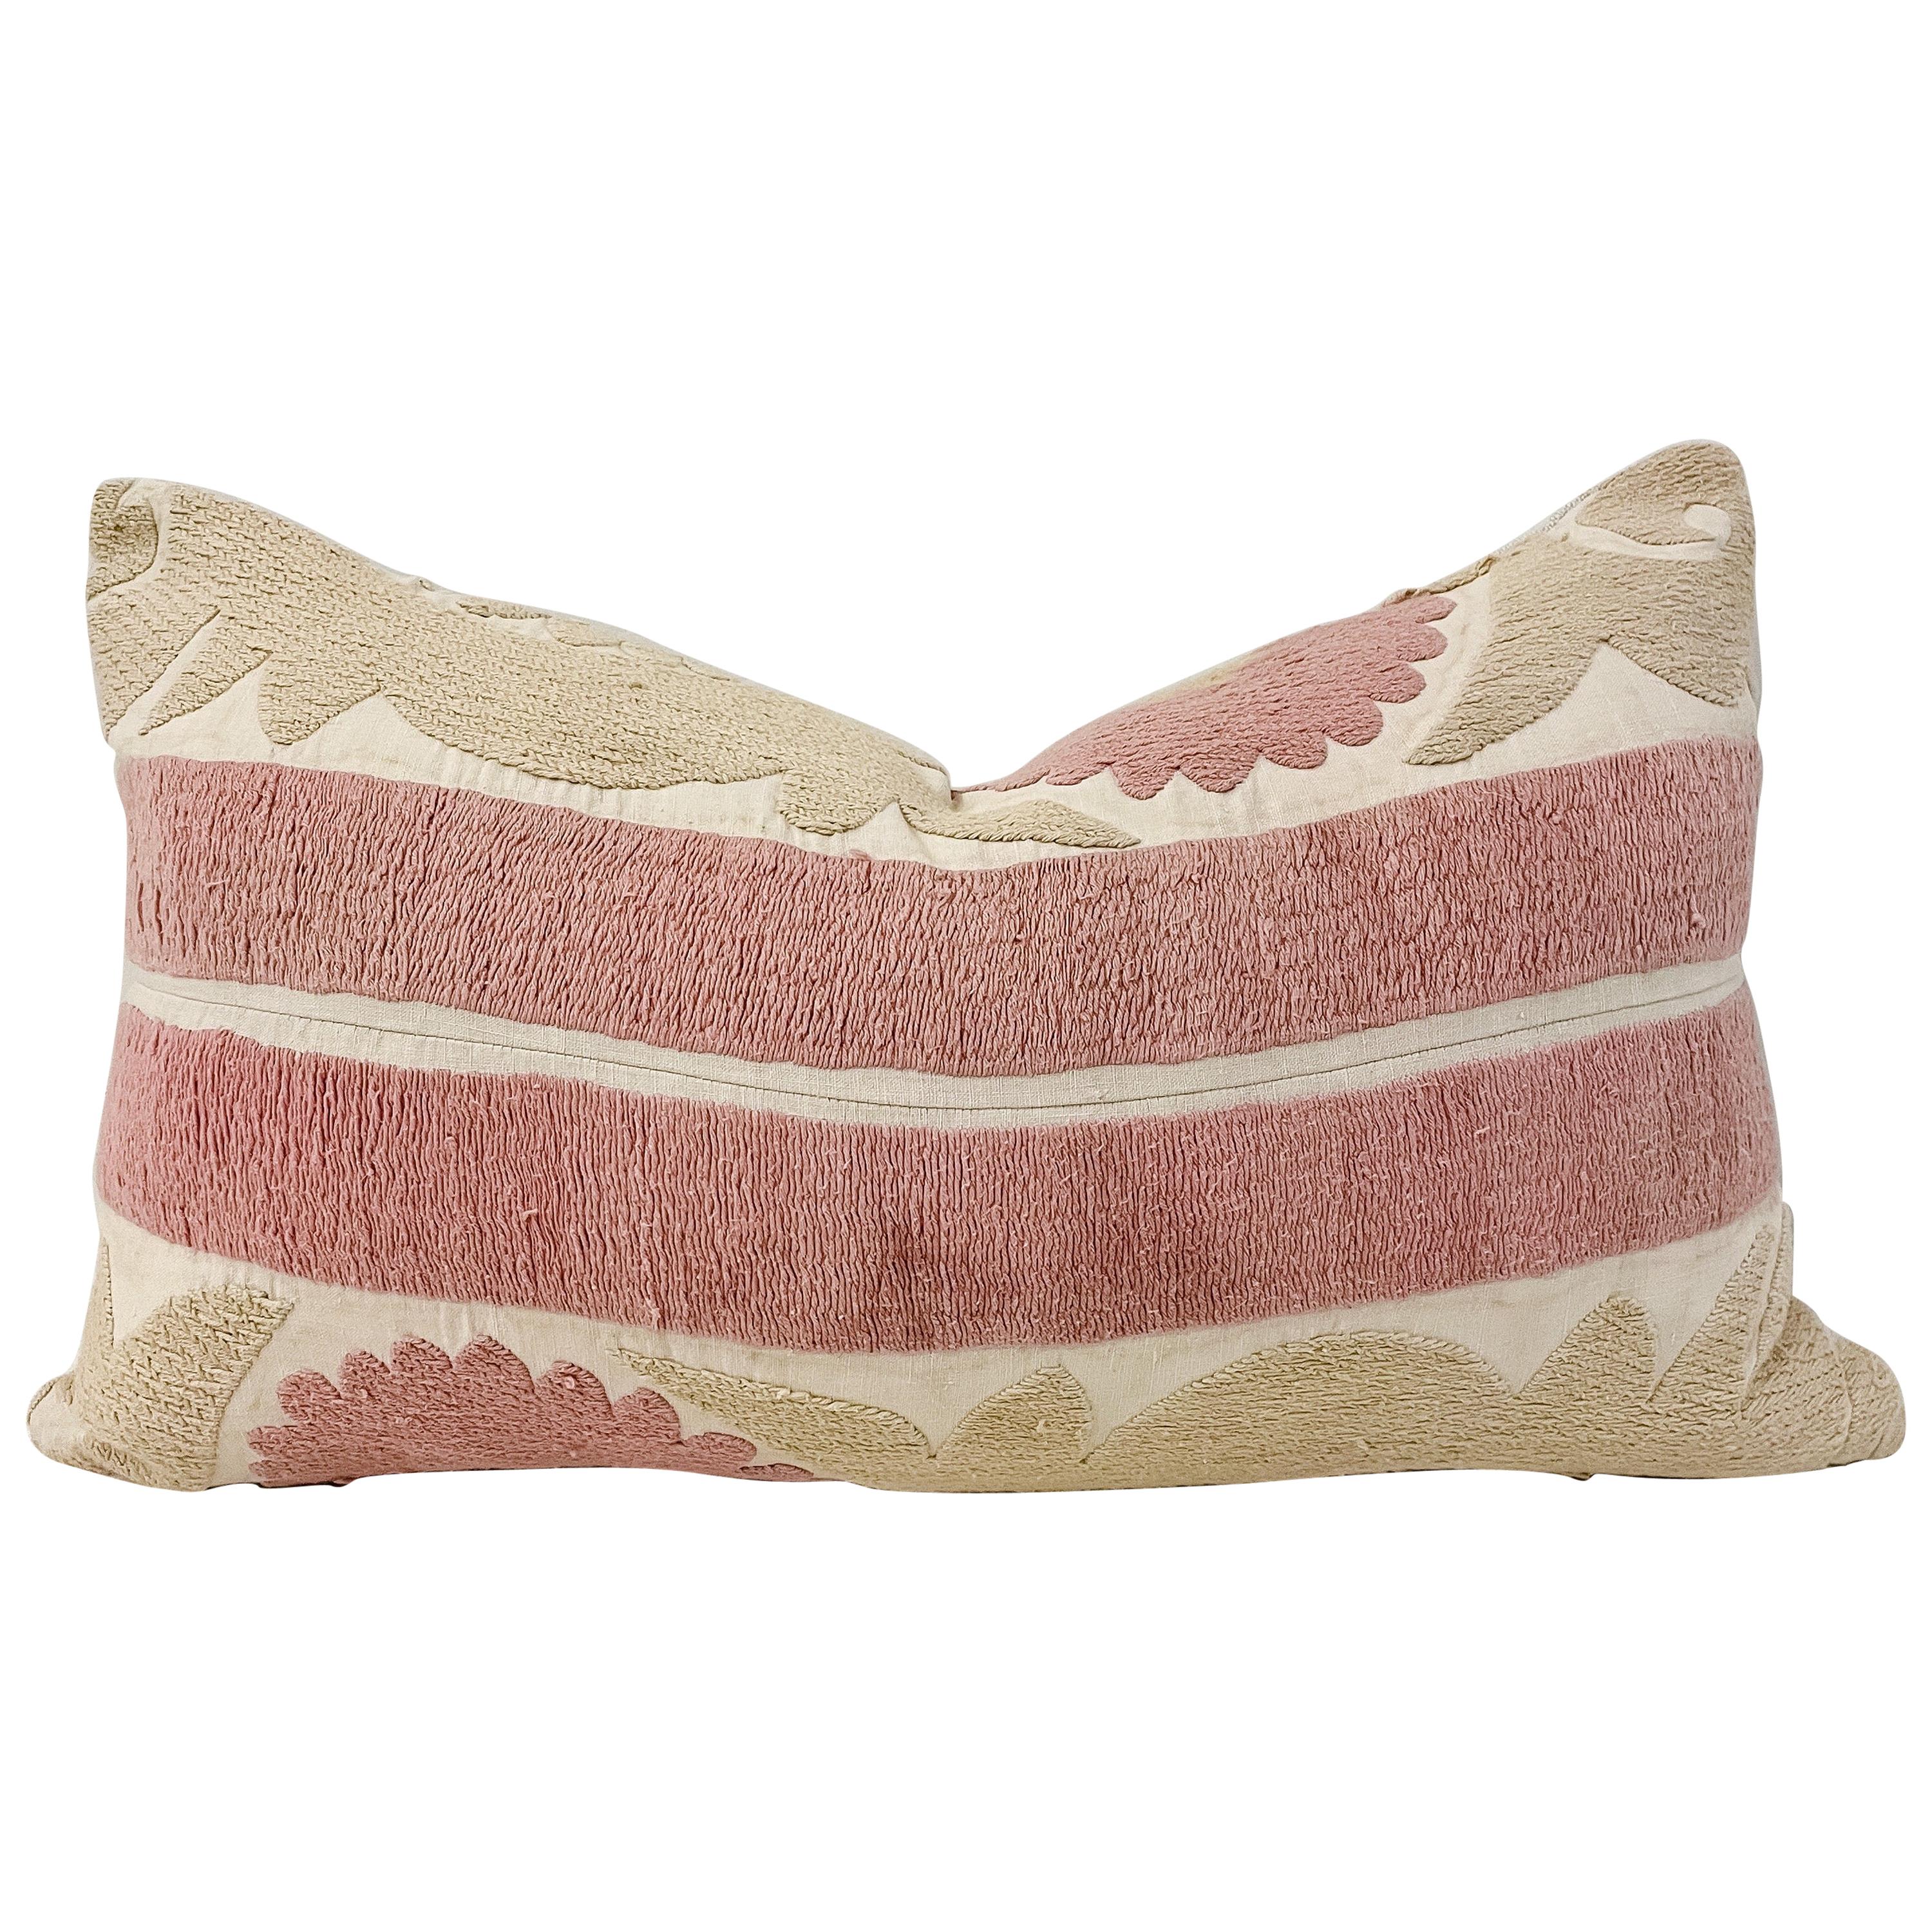 Vintage Pale Pink and Tan Embroidered Suzani Pillow with Down Feather Insert